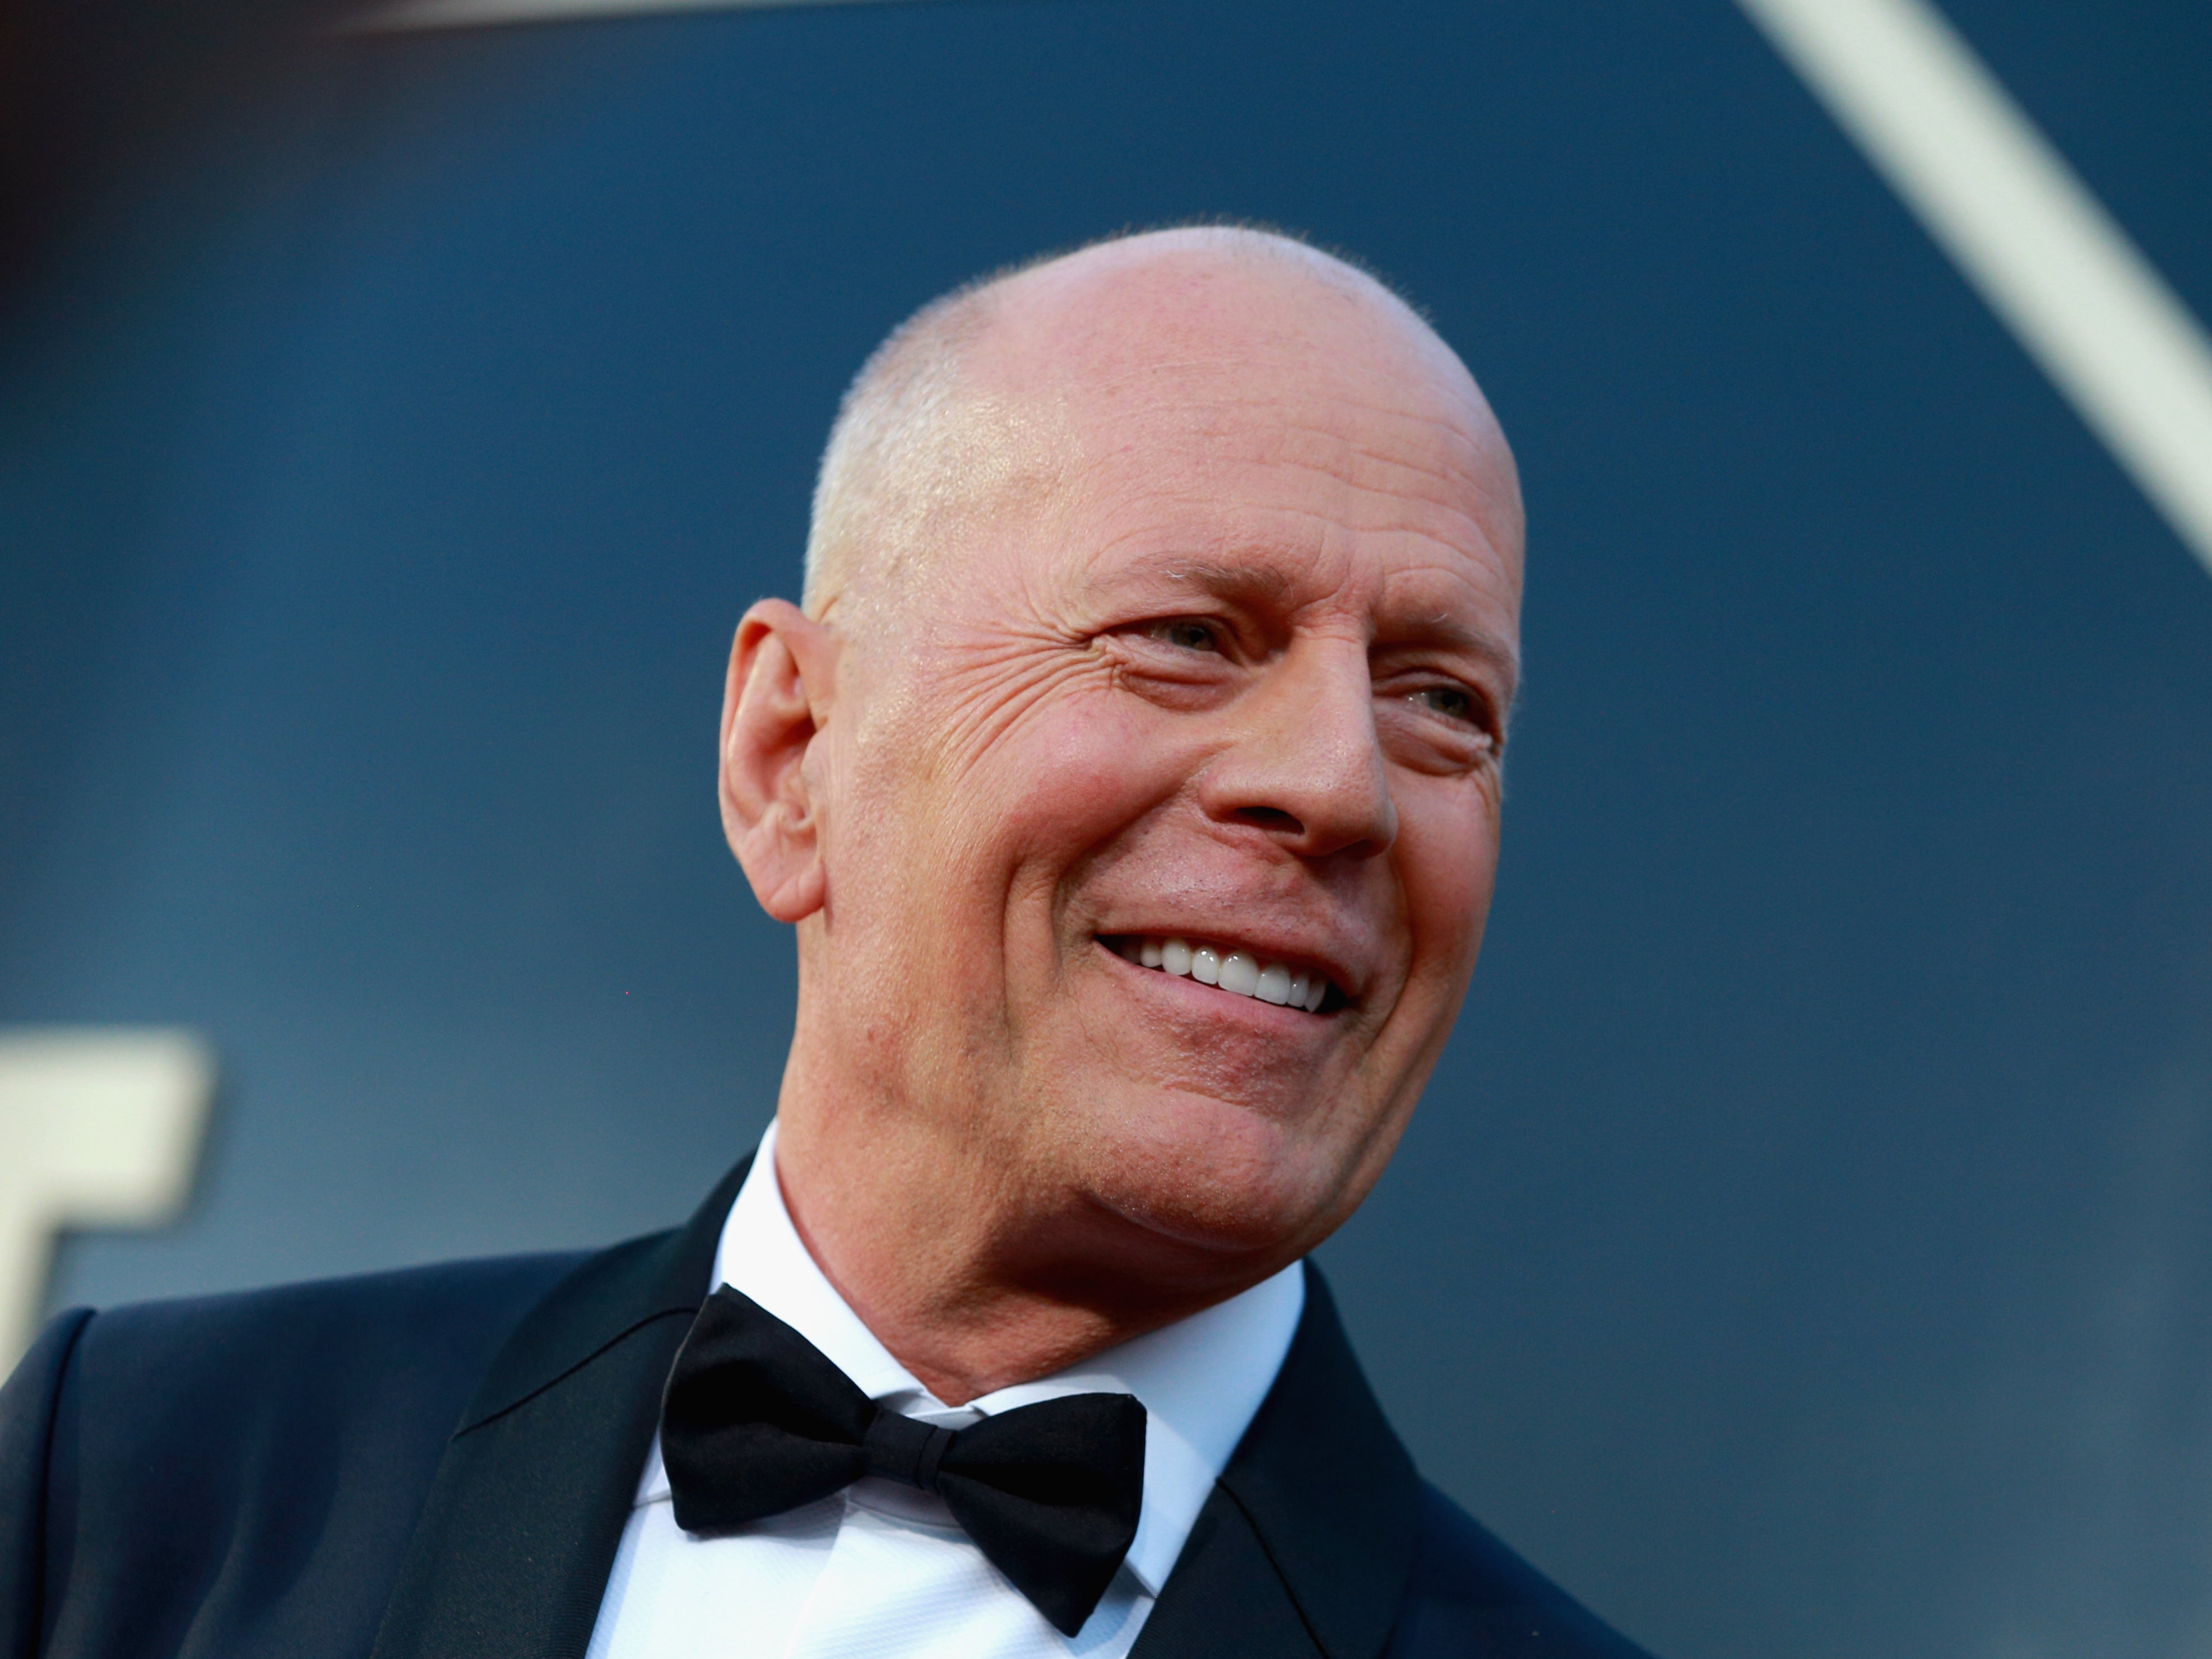 Bruce Willis is ‘stepping away’ from acting after aphasia diagnosis